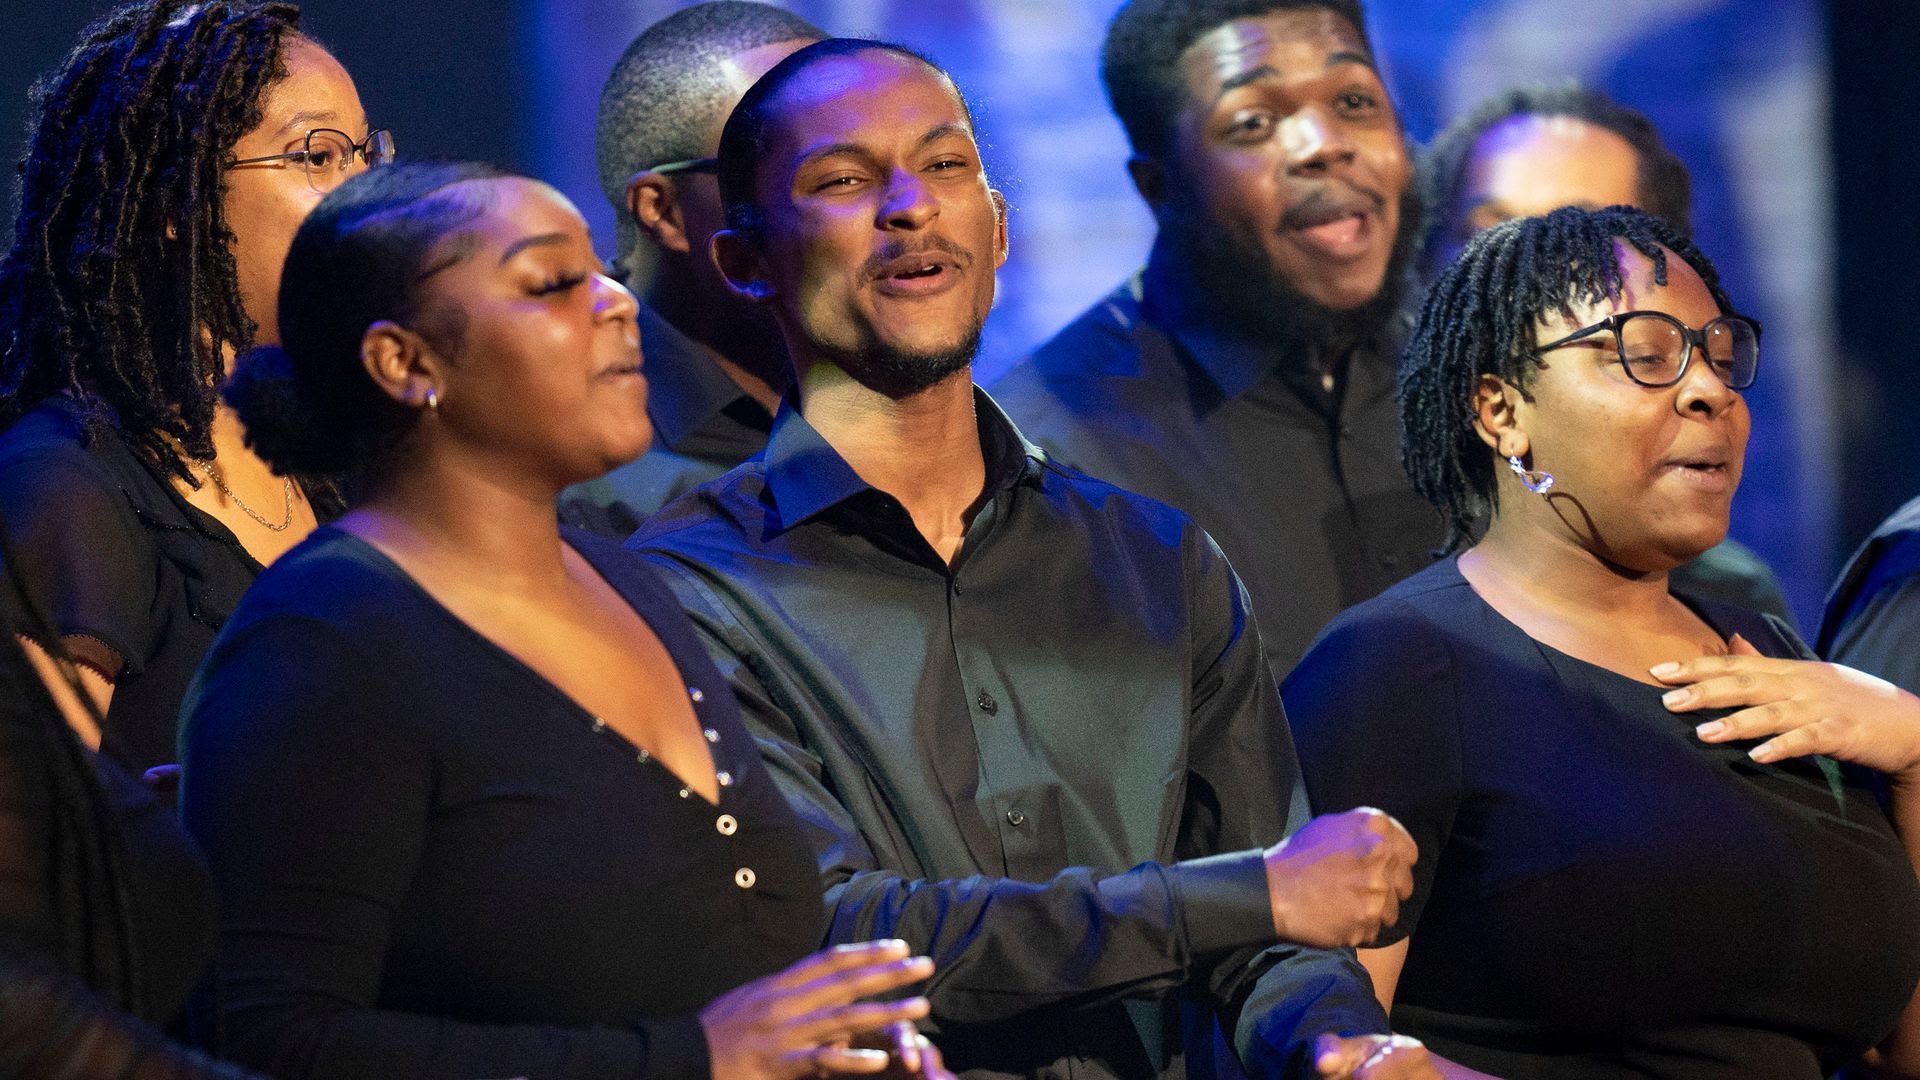 The Fisk Jubilee Singers perform during the 2021 Americana Music Association Awards ceremony at the Ryman Auditorium. 